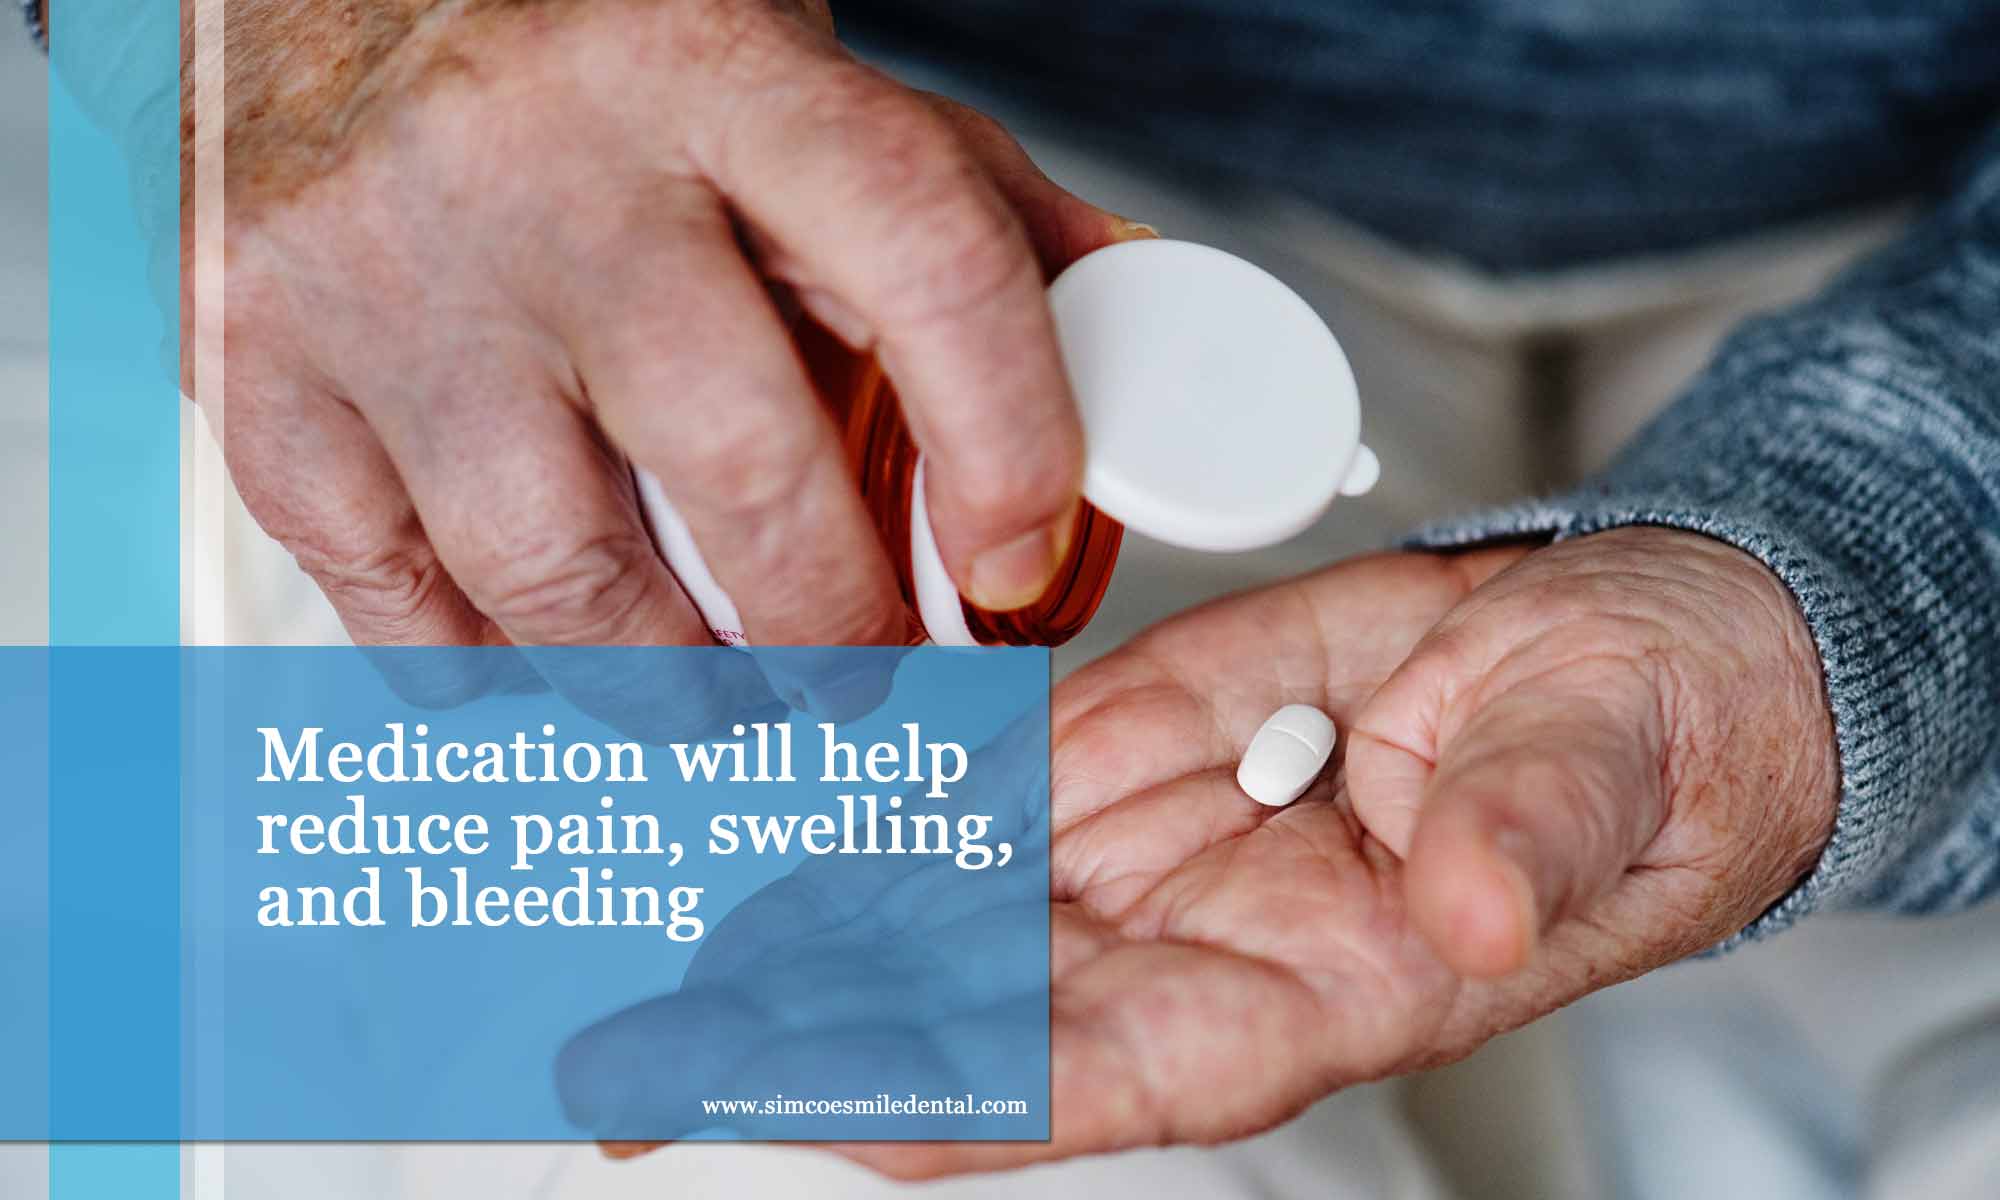 Medication will help reduce pain, swelling, and bleeding